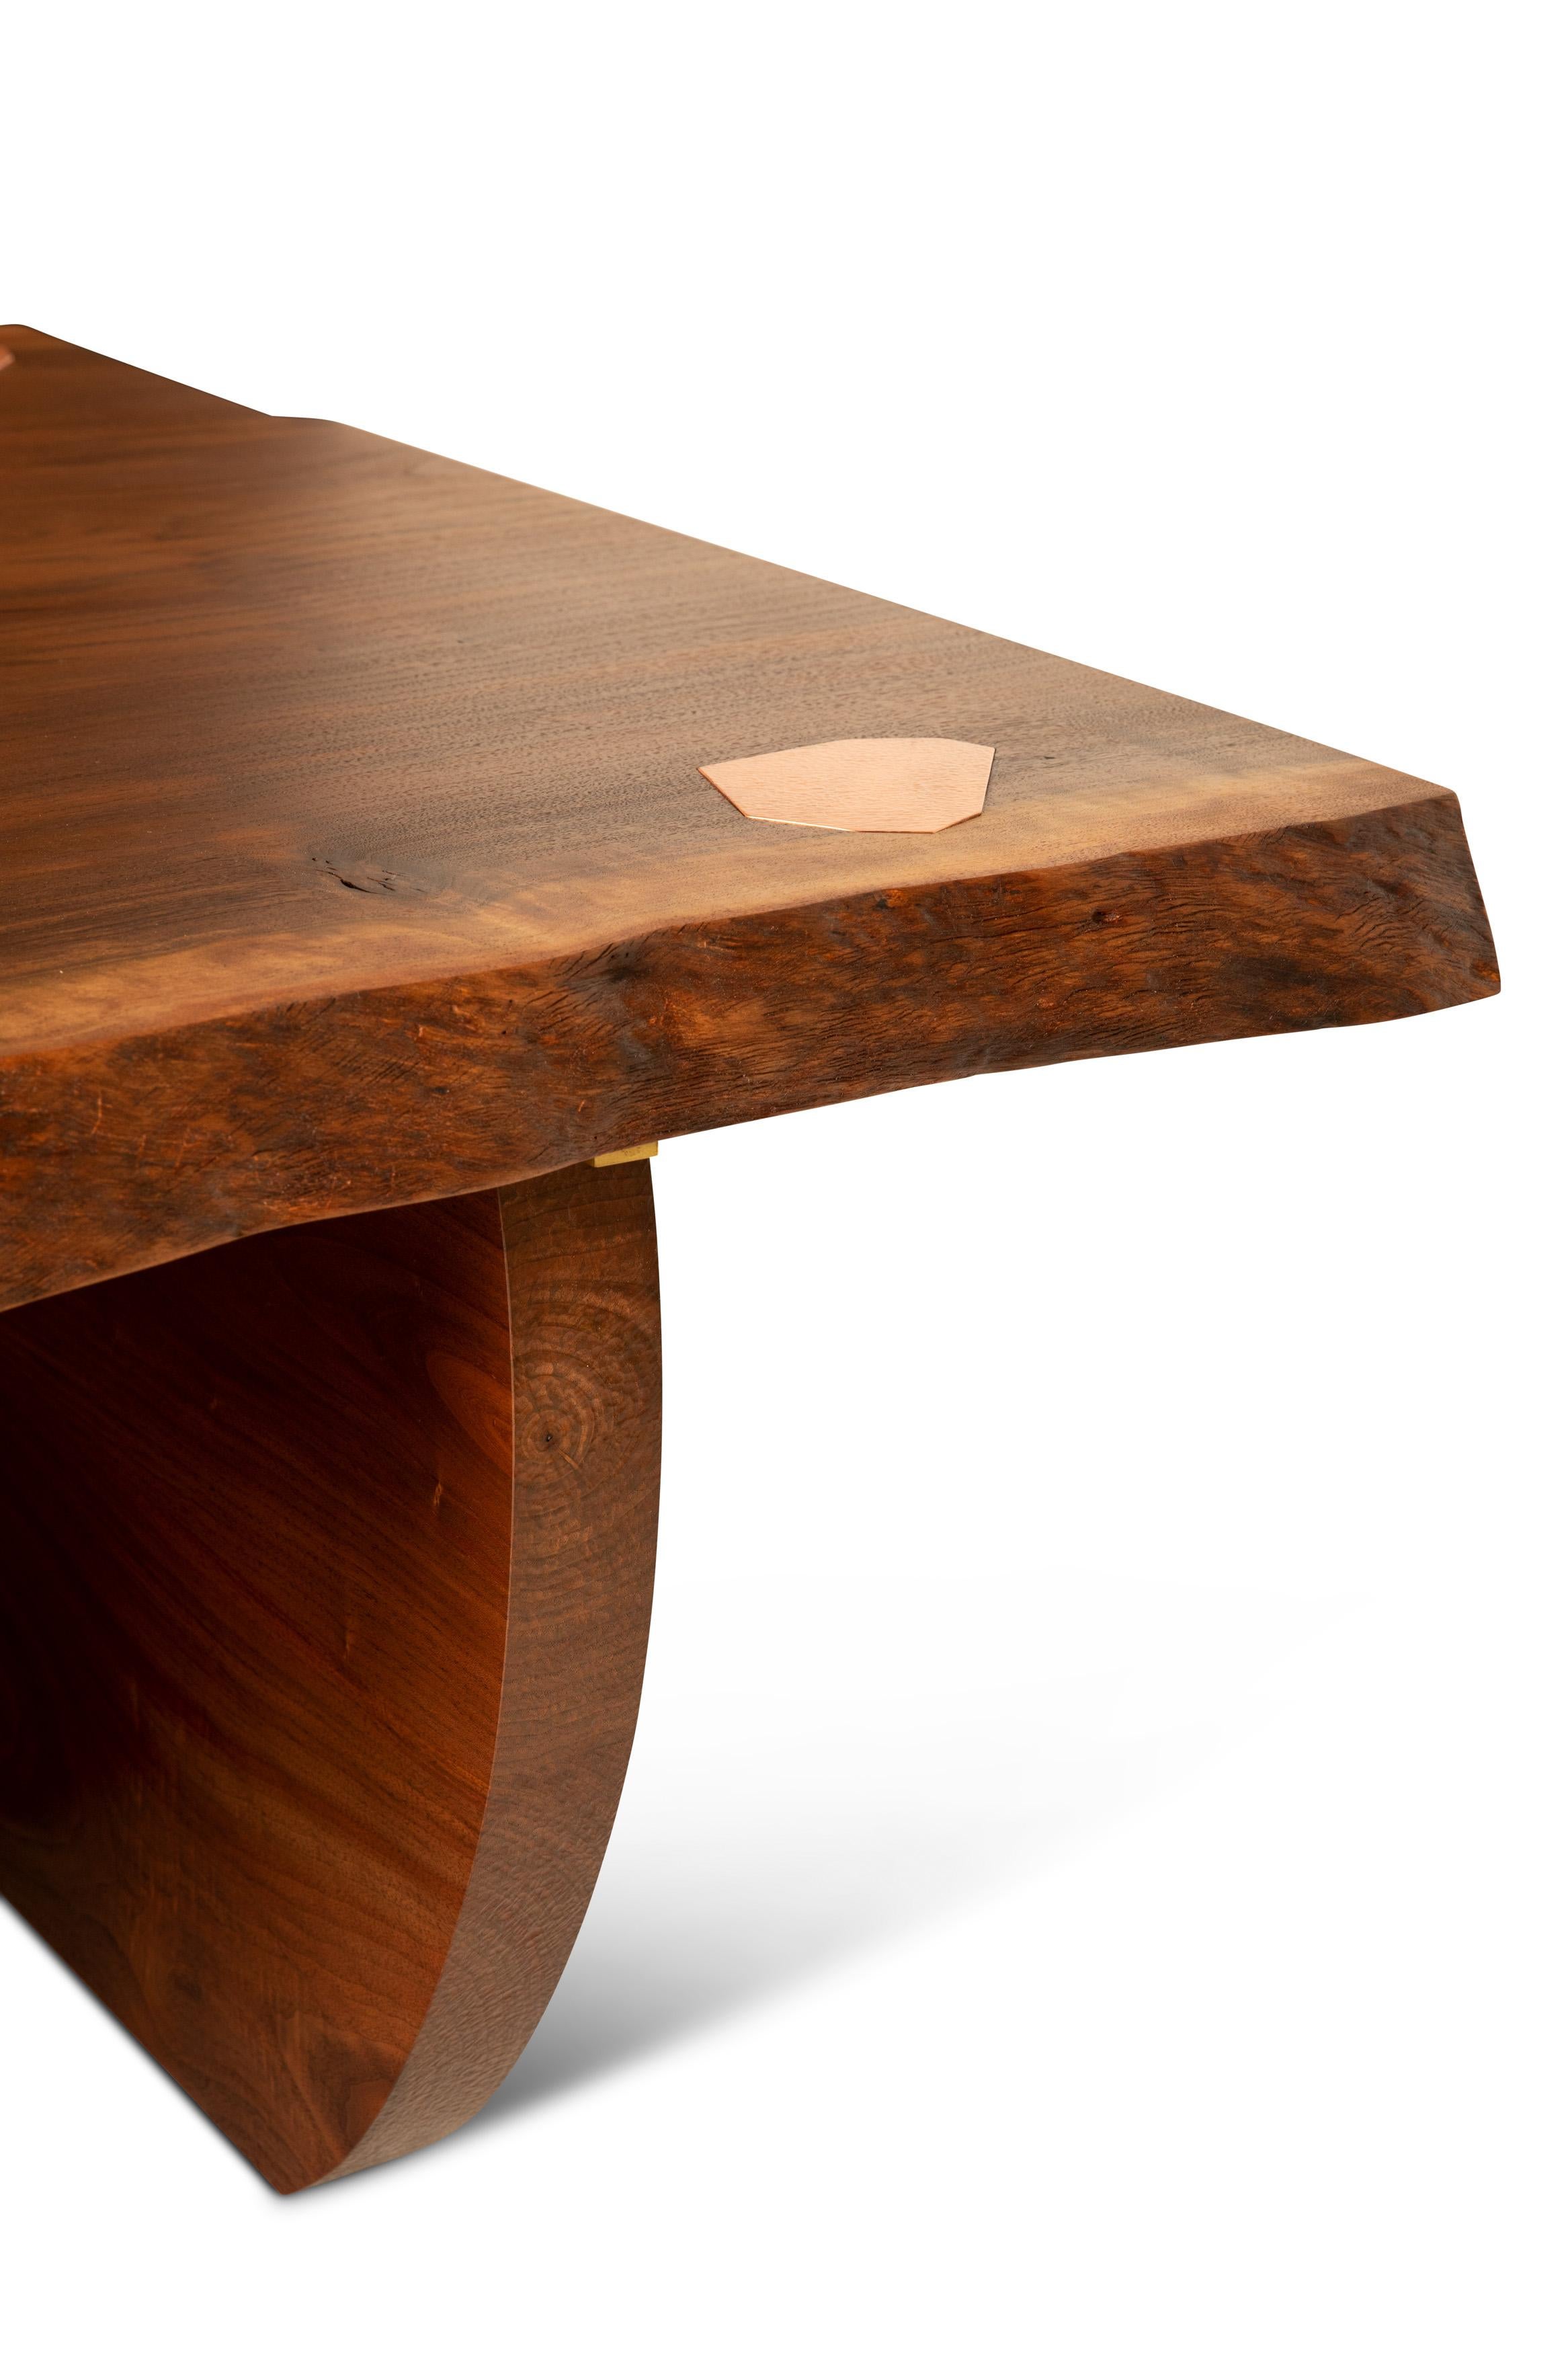 Hand-Carved Geode Table 002 in Claro and Black Walnut with Copper Inlays For Sale